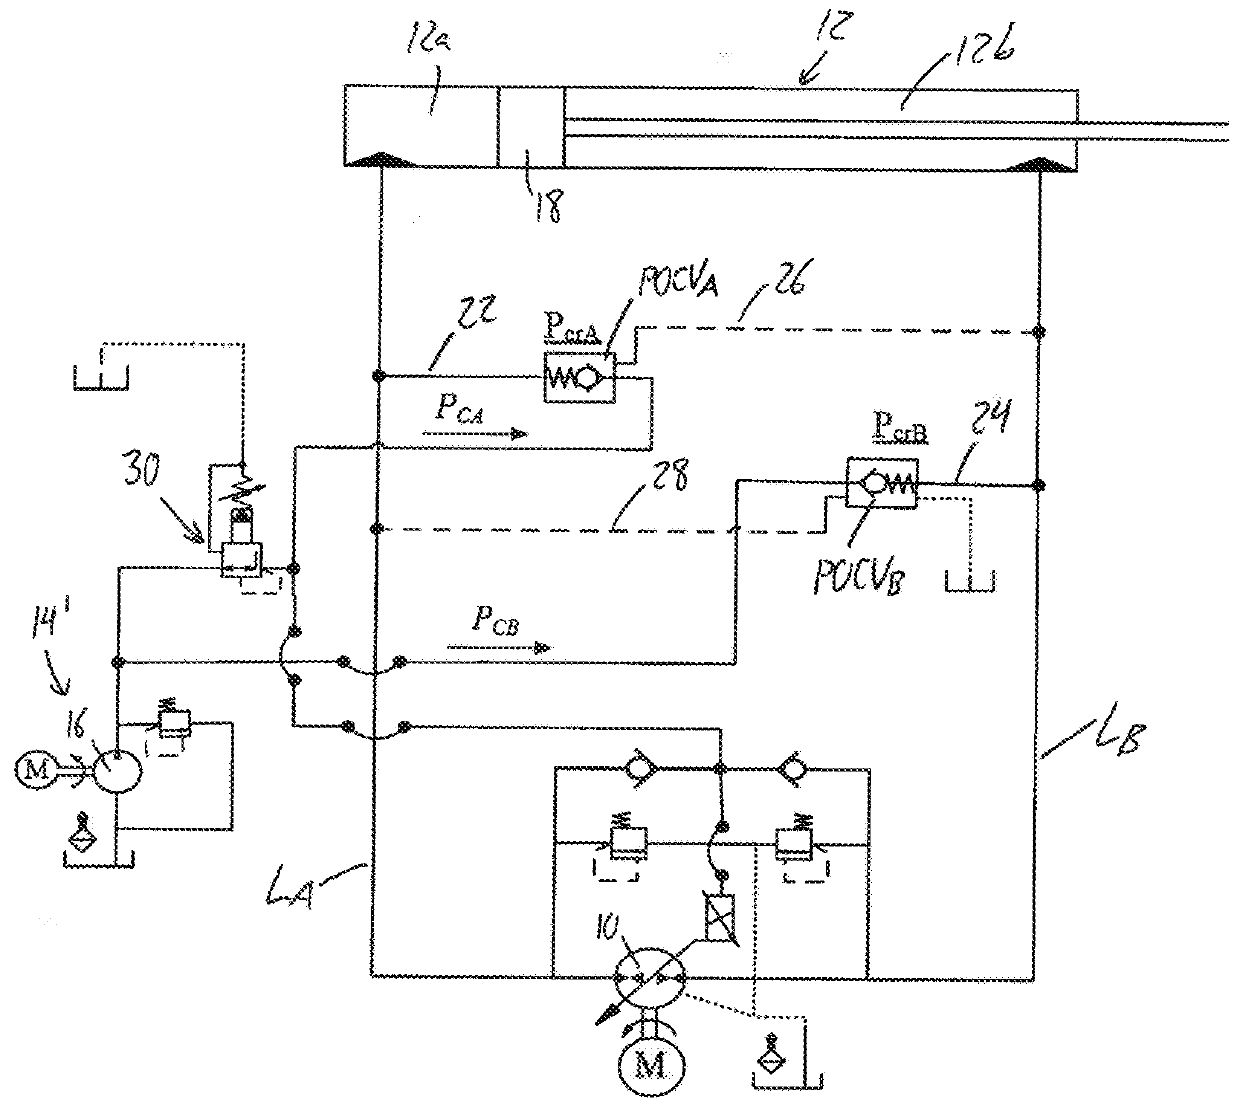 Pump-Controlled Hydraulic Circuits for Operating a Differential Hydraulic Actuator